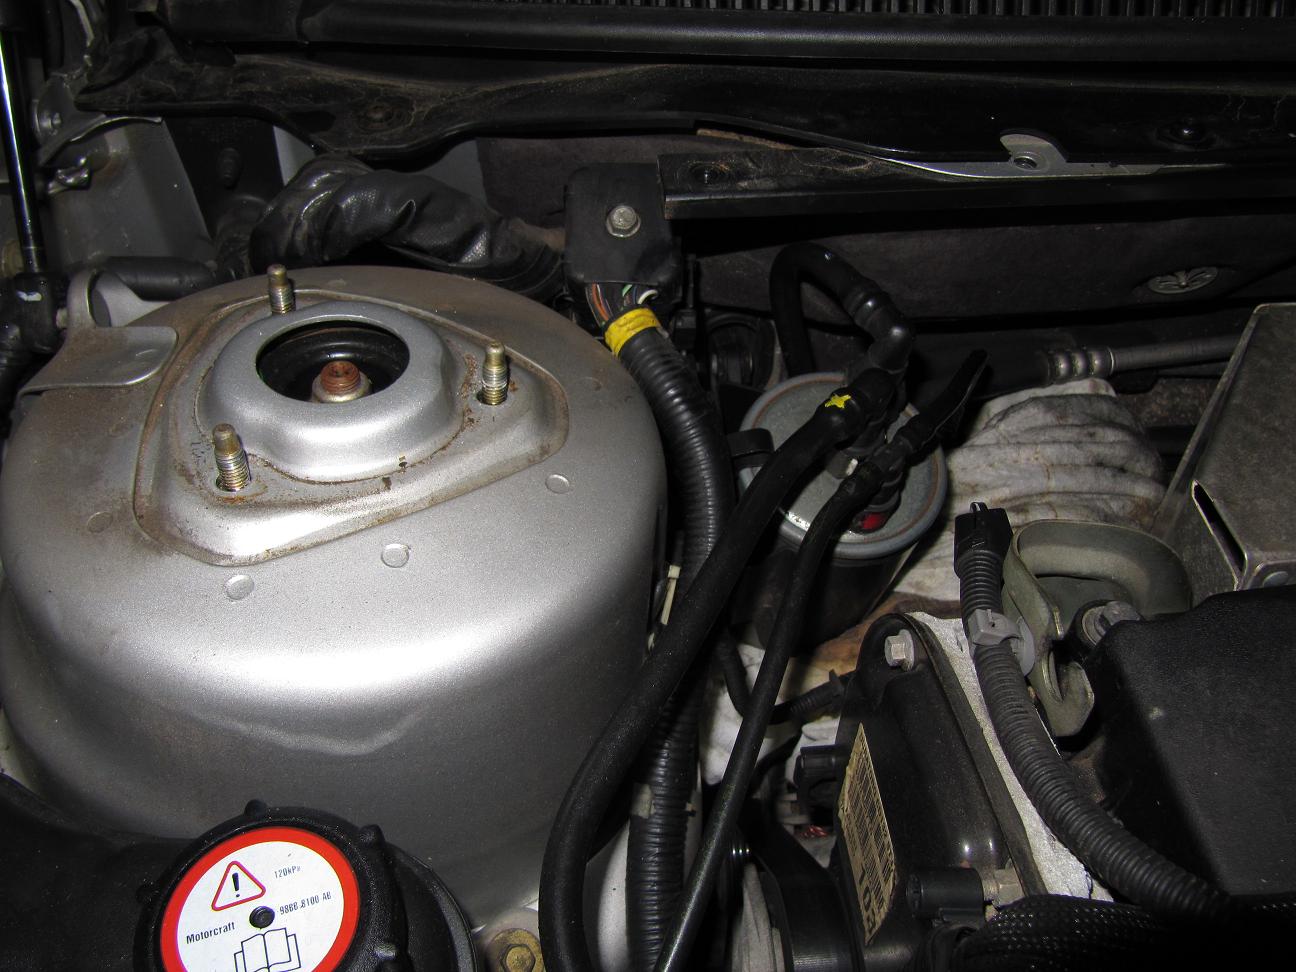 Ford focus tdci fuel filter change 2008 ford focus fuel filter location 